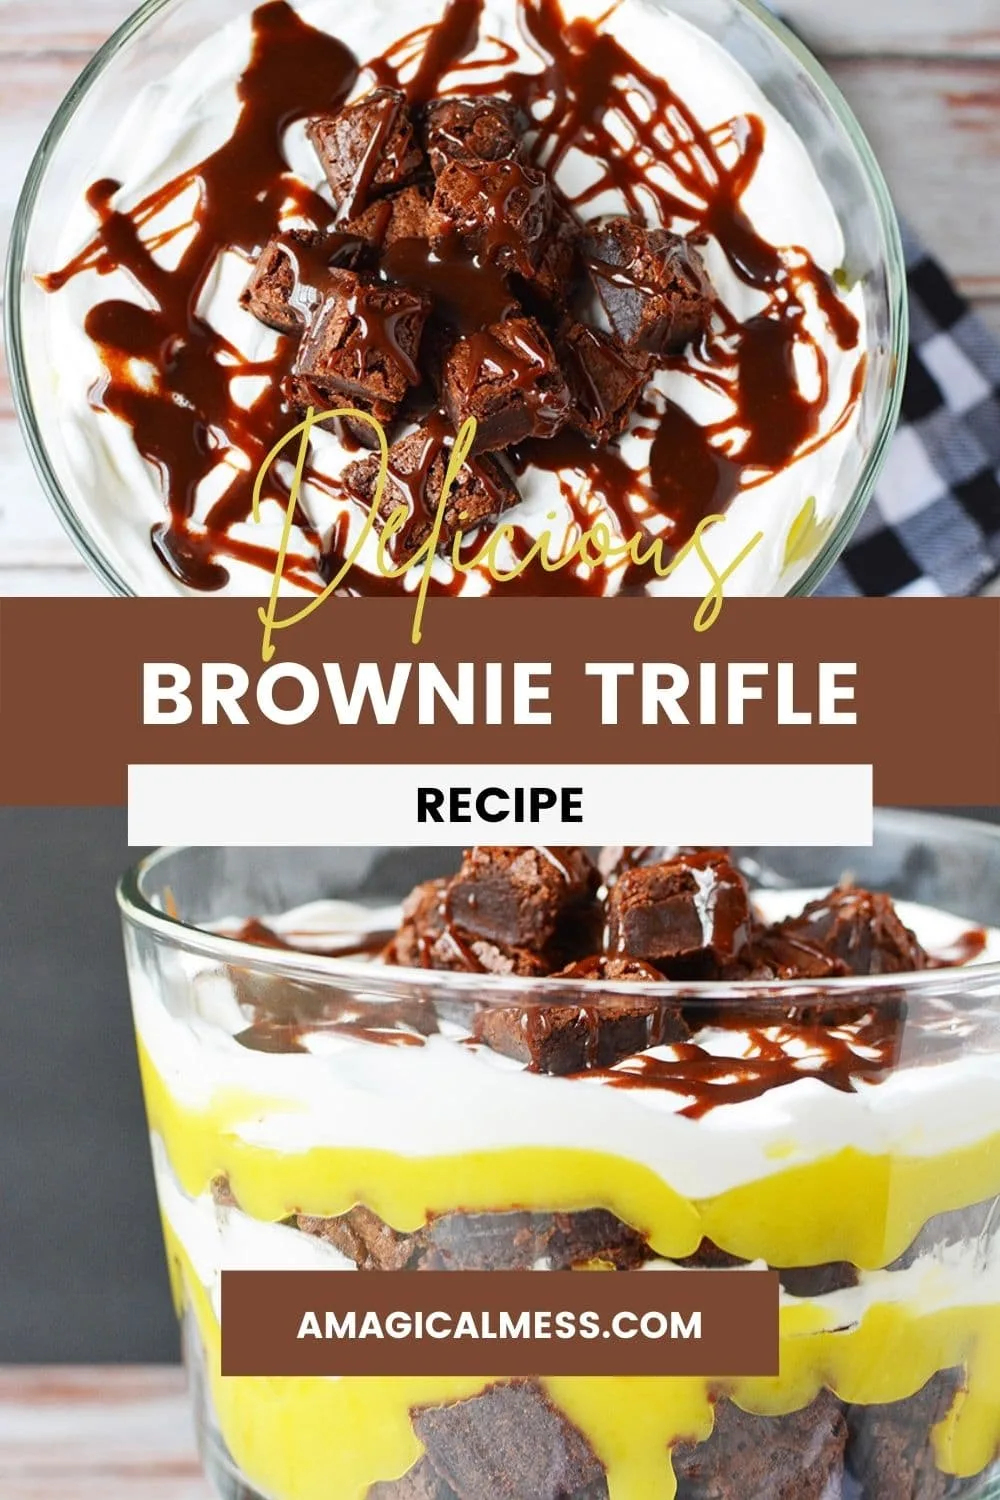 Top of a brownie trifle and a side view to see the layers of pudding, brownies, and whipped cream.